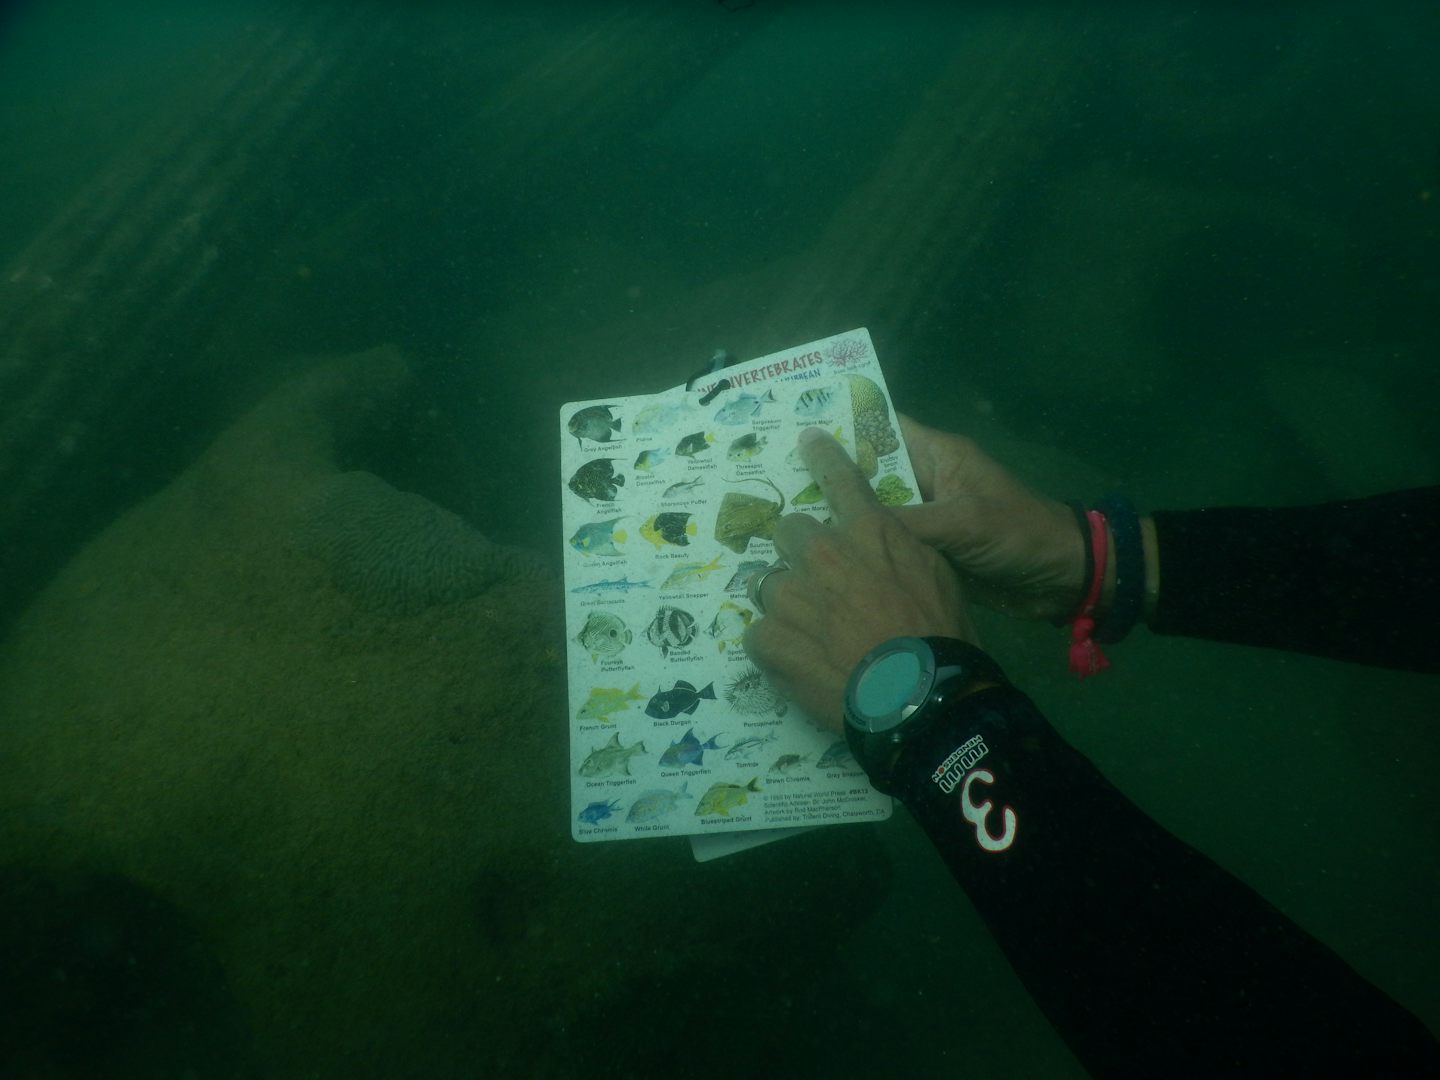 The dive master had a chart and would identify and marine life we saw.